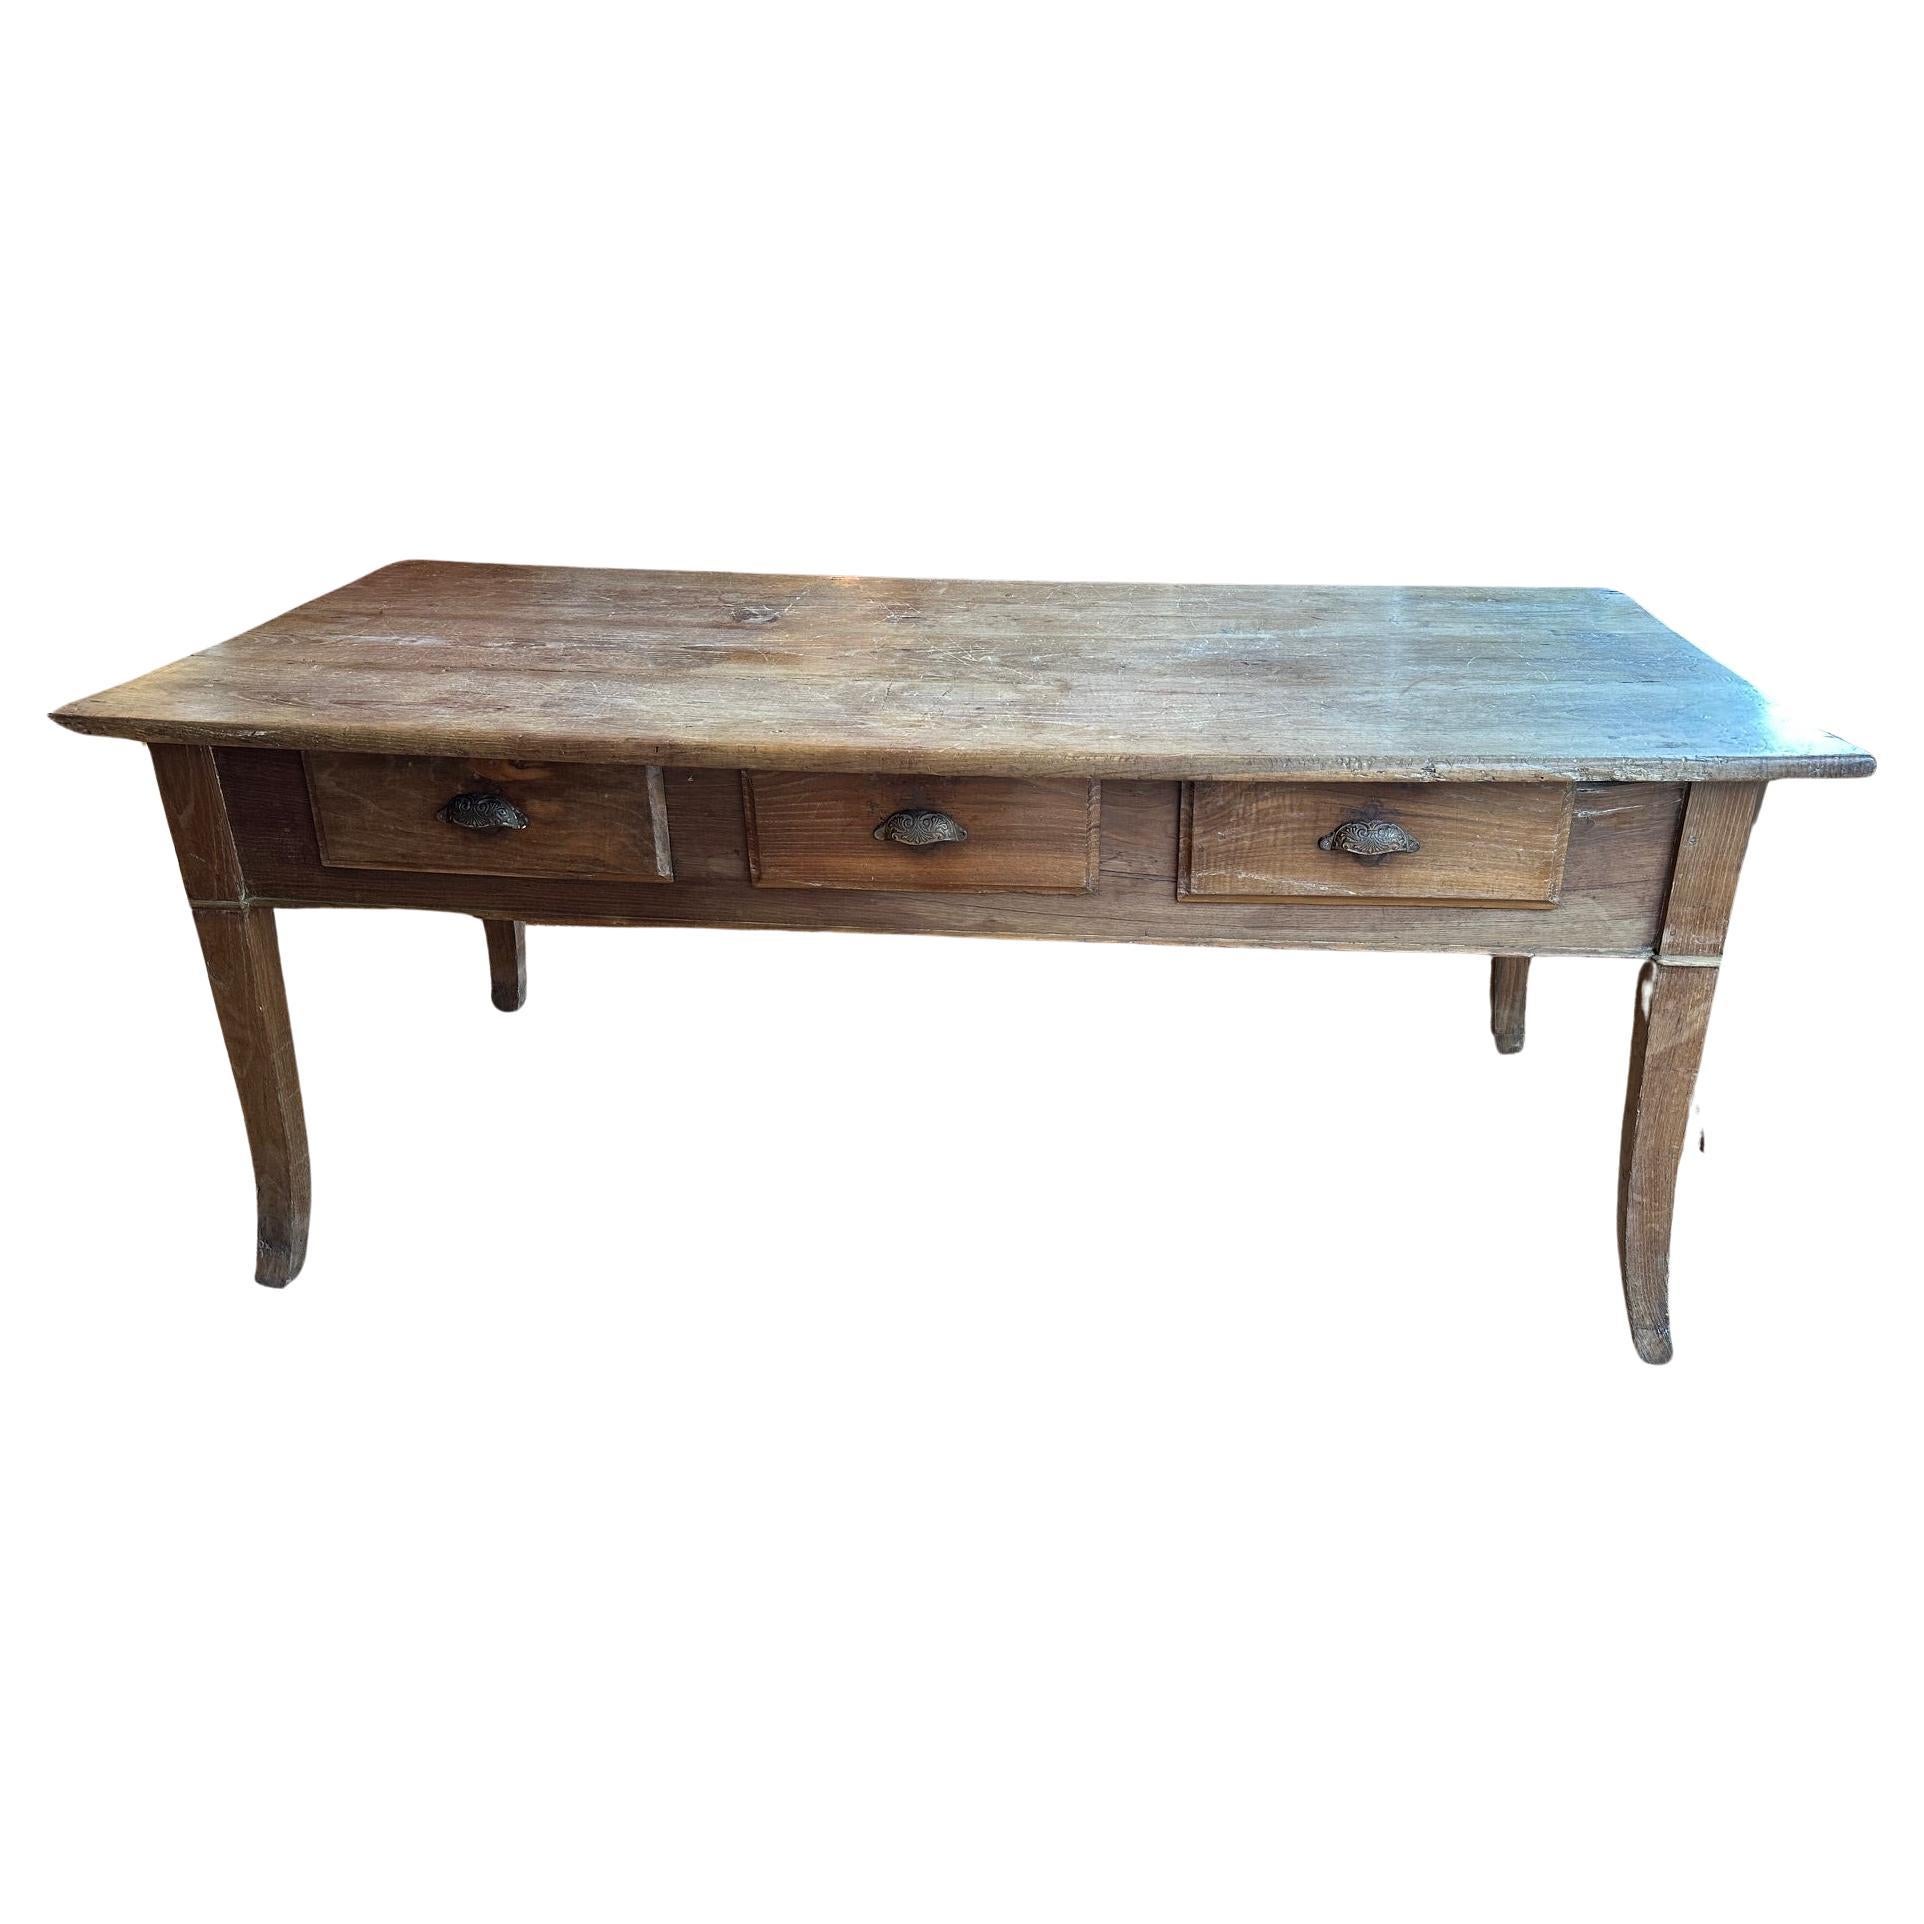 French Chestnut country table with three drawers For Sale